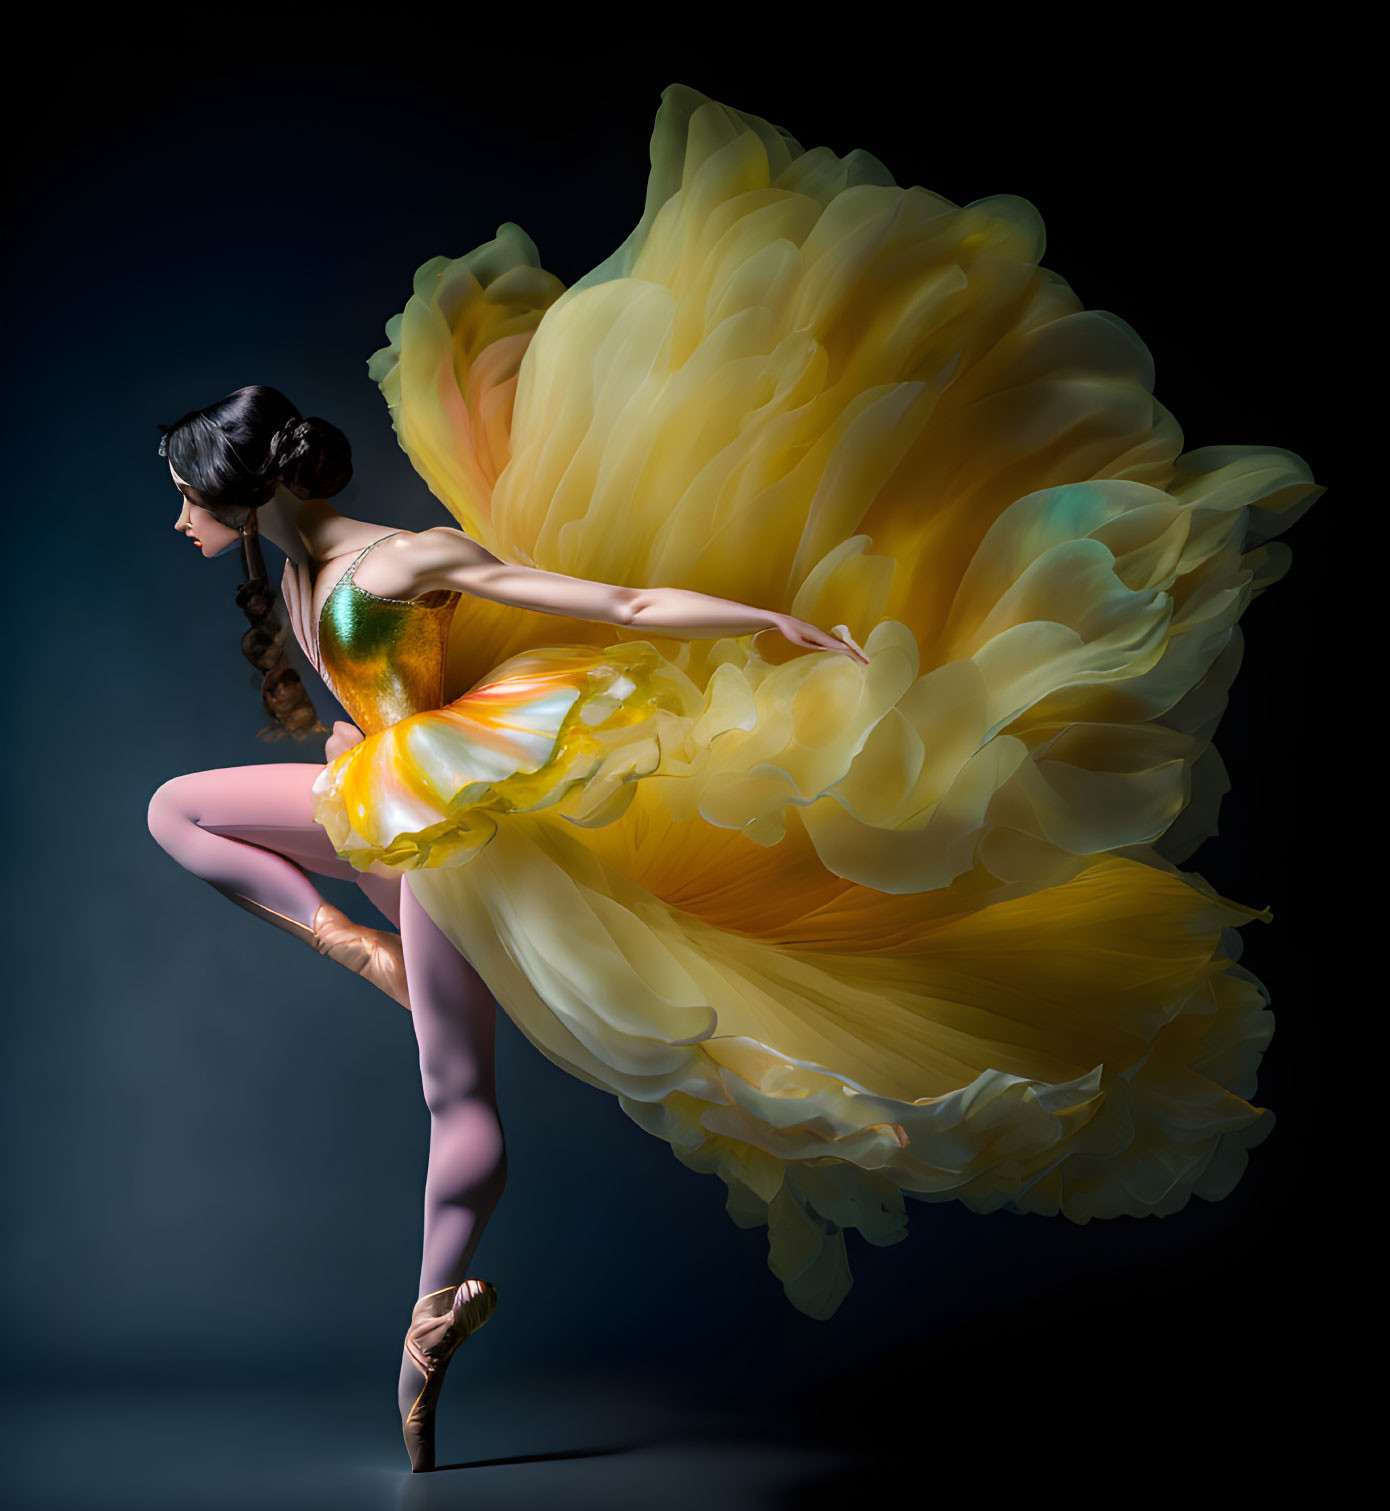 Dancer In A Yellow Gown